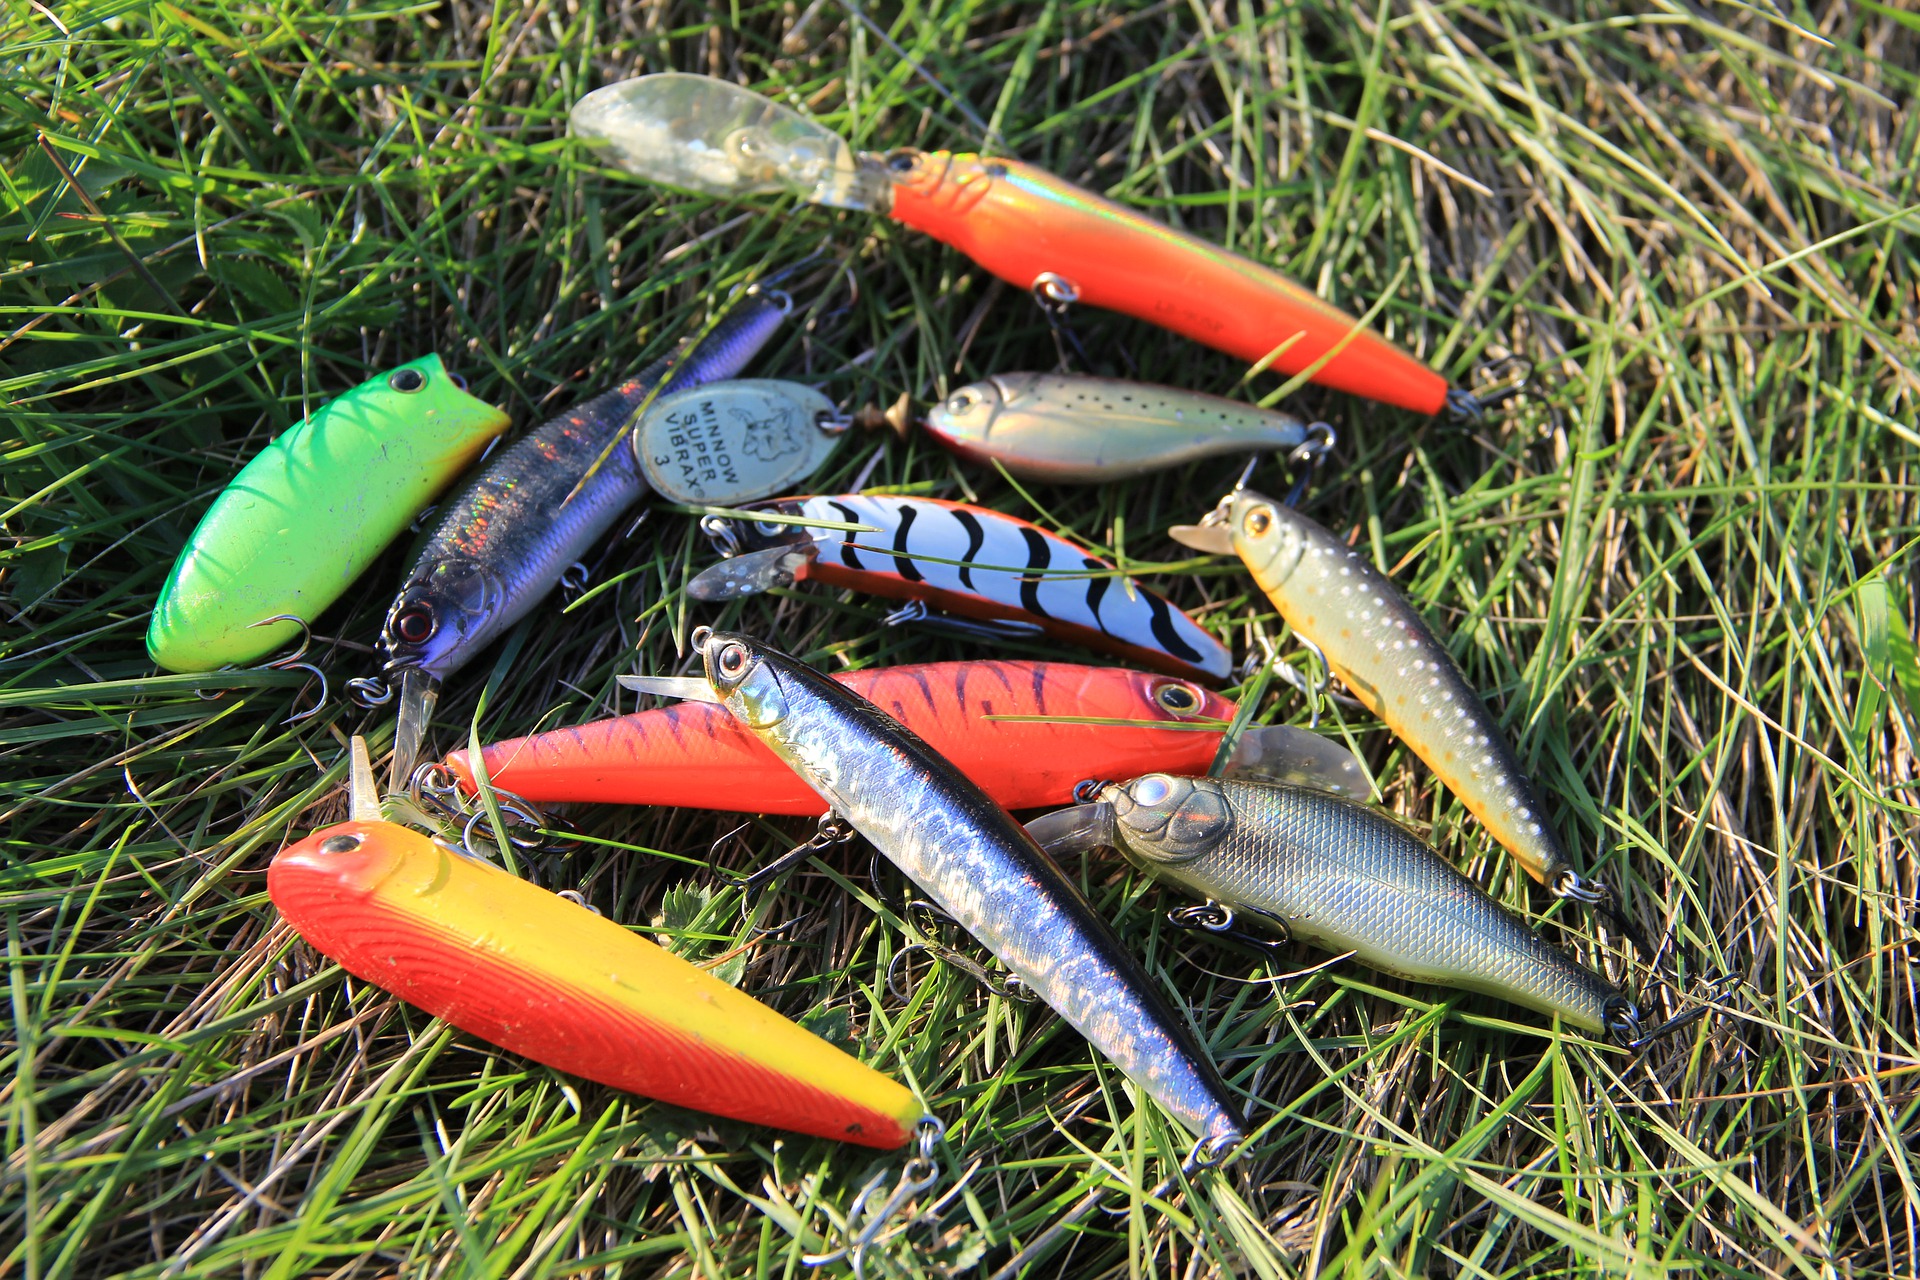 How To Make Homemade Fishing Lures Out Of Household Items